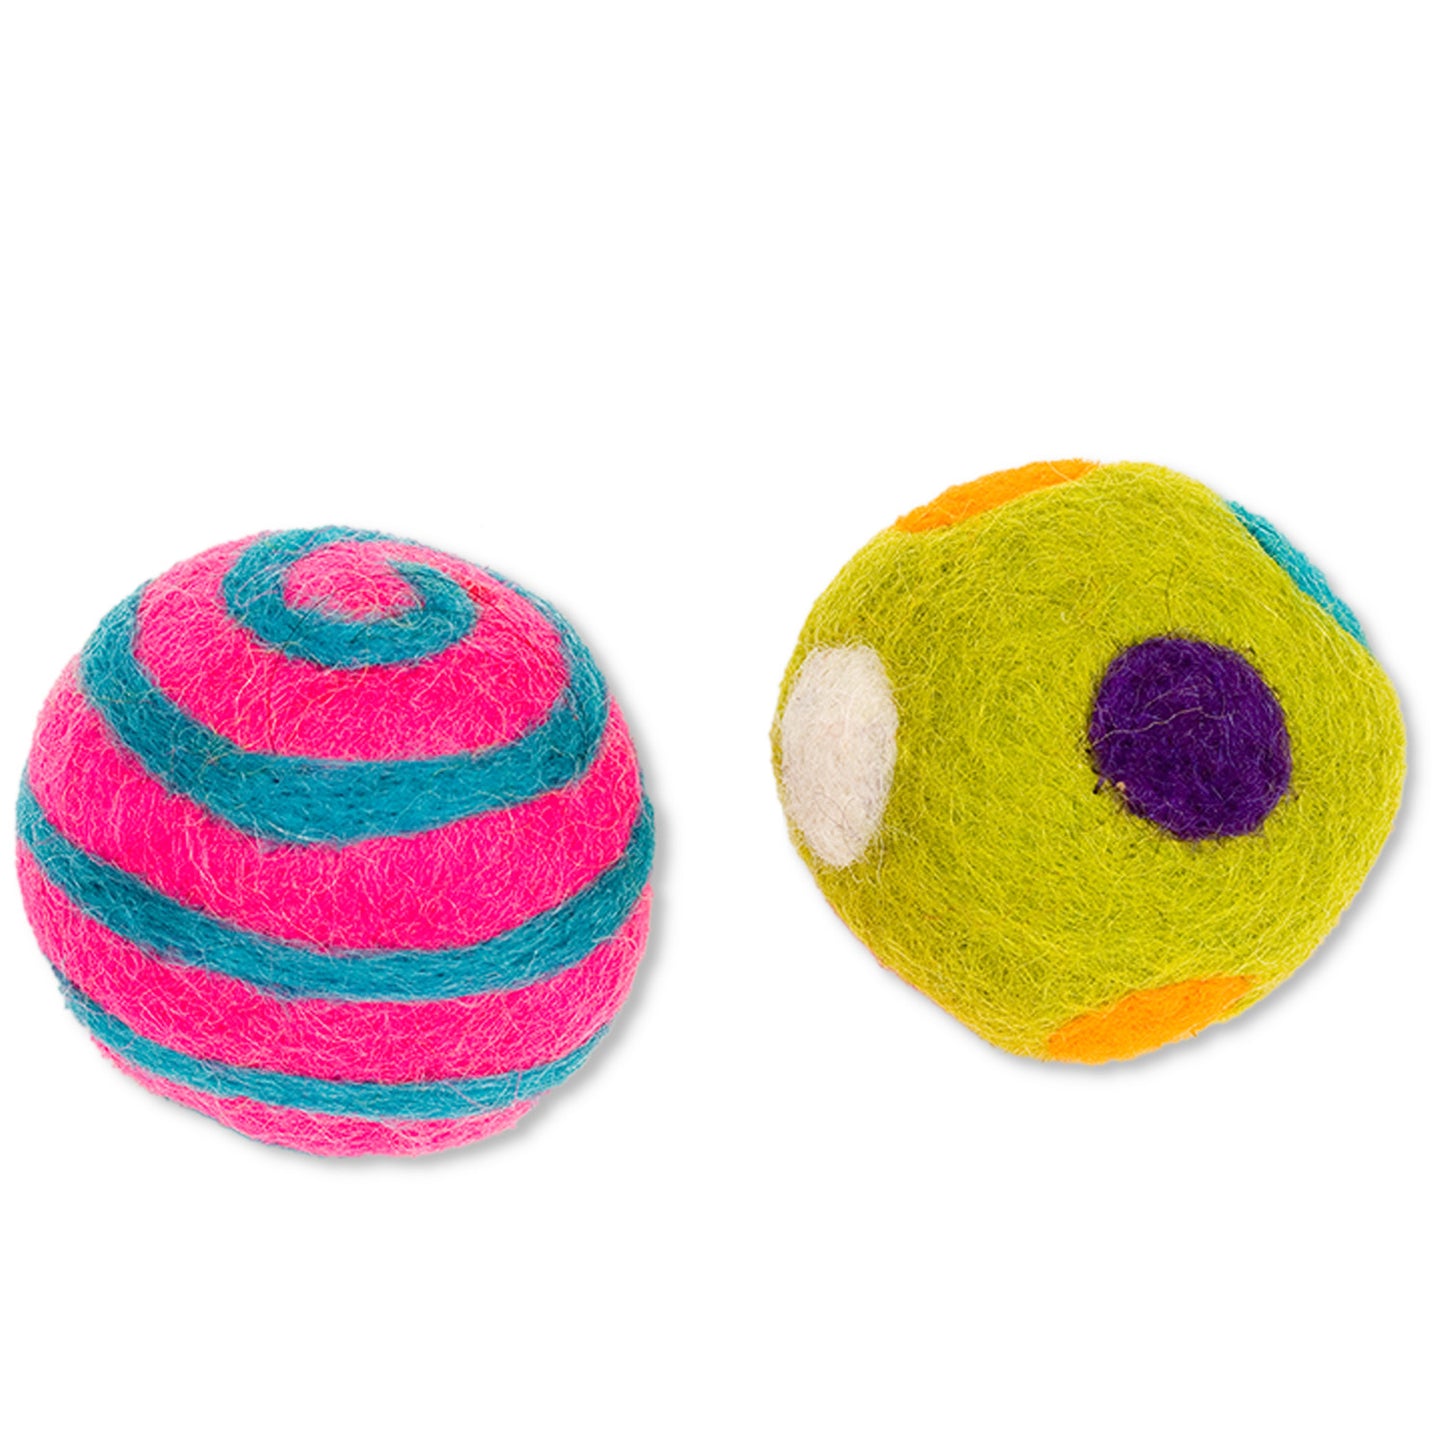 1.5" Balls, Pack of 2 Toys